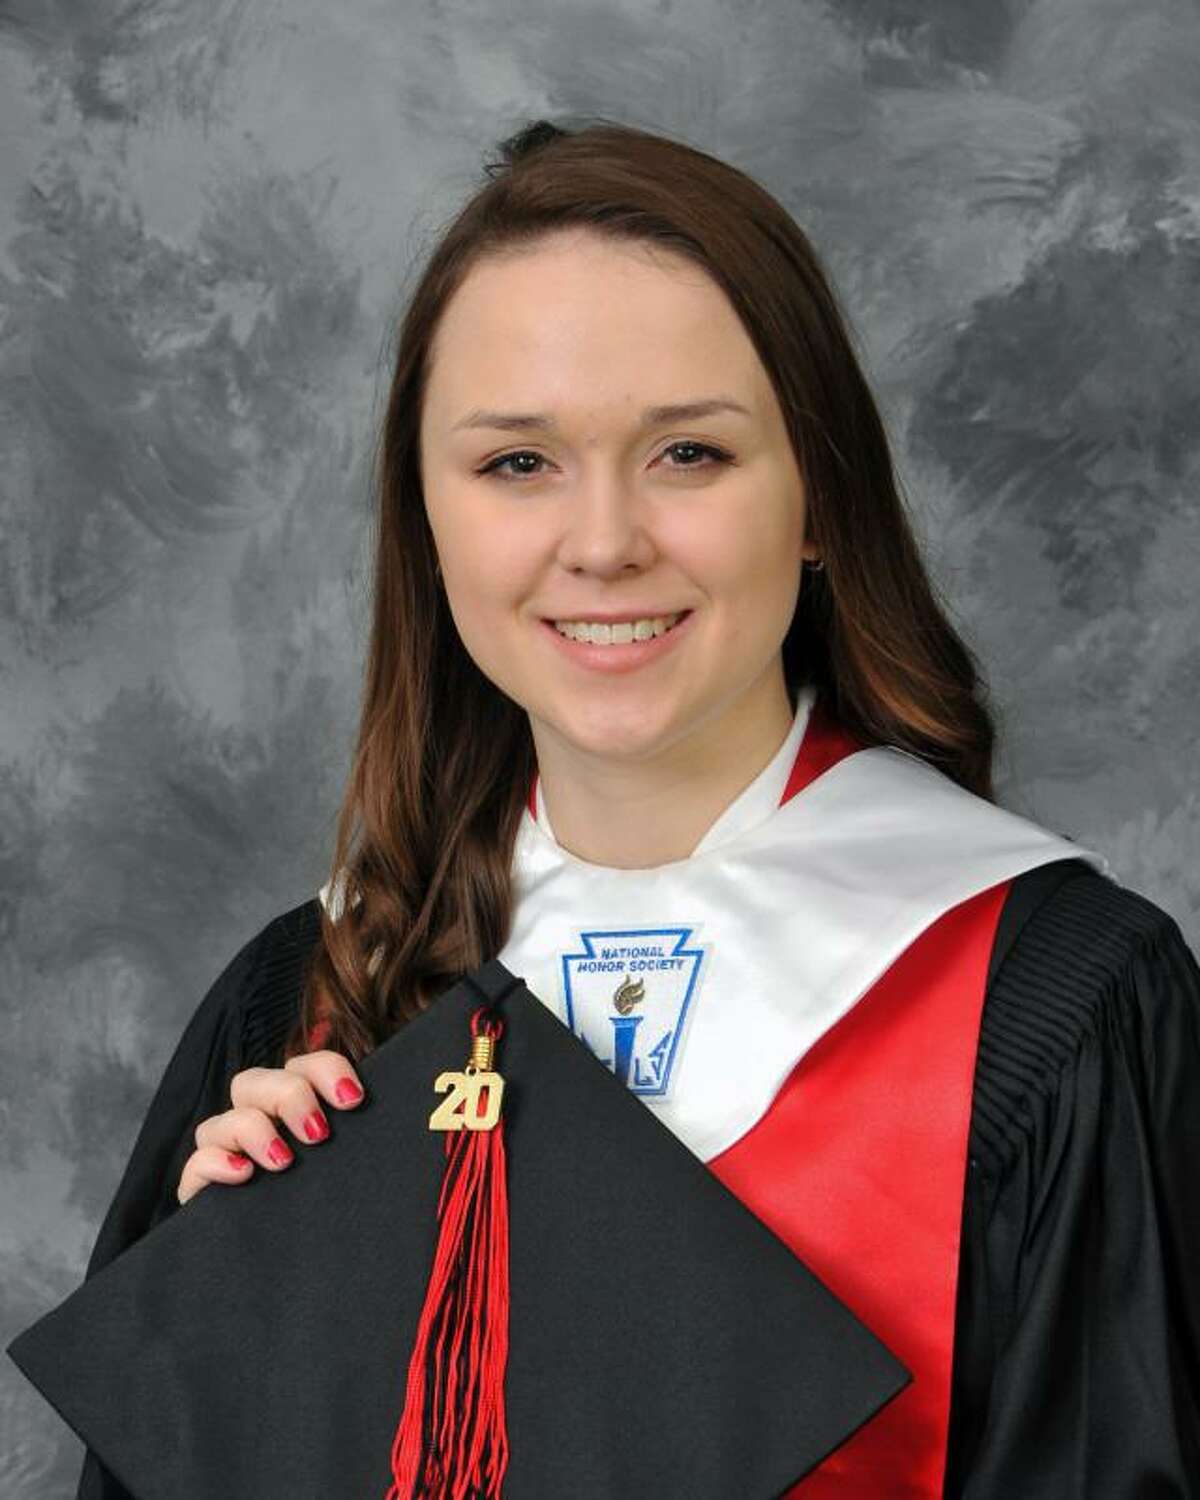 Jada Fink is the valedictorian for the Porter High School Class of 2020. She will attend Carnegie Mellon University in Pennsylvania and study Engineering.